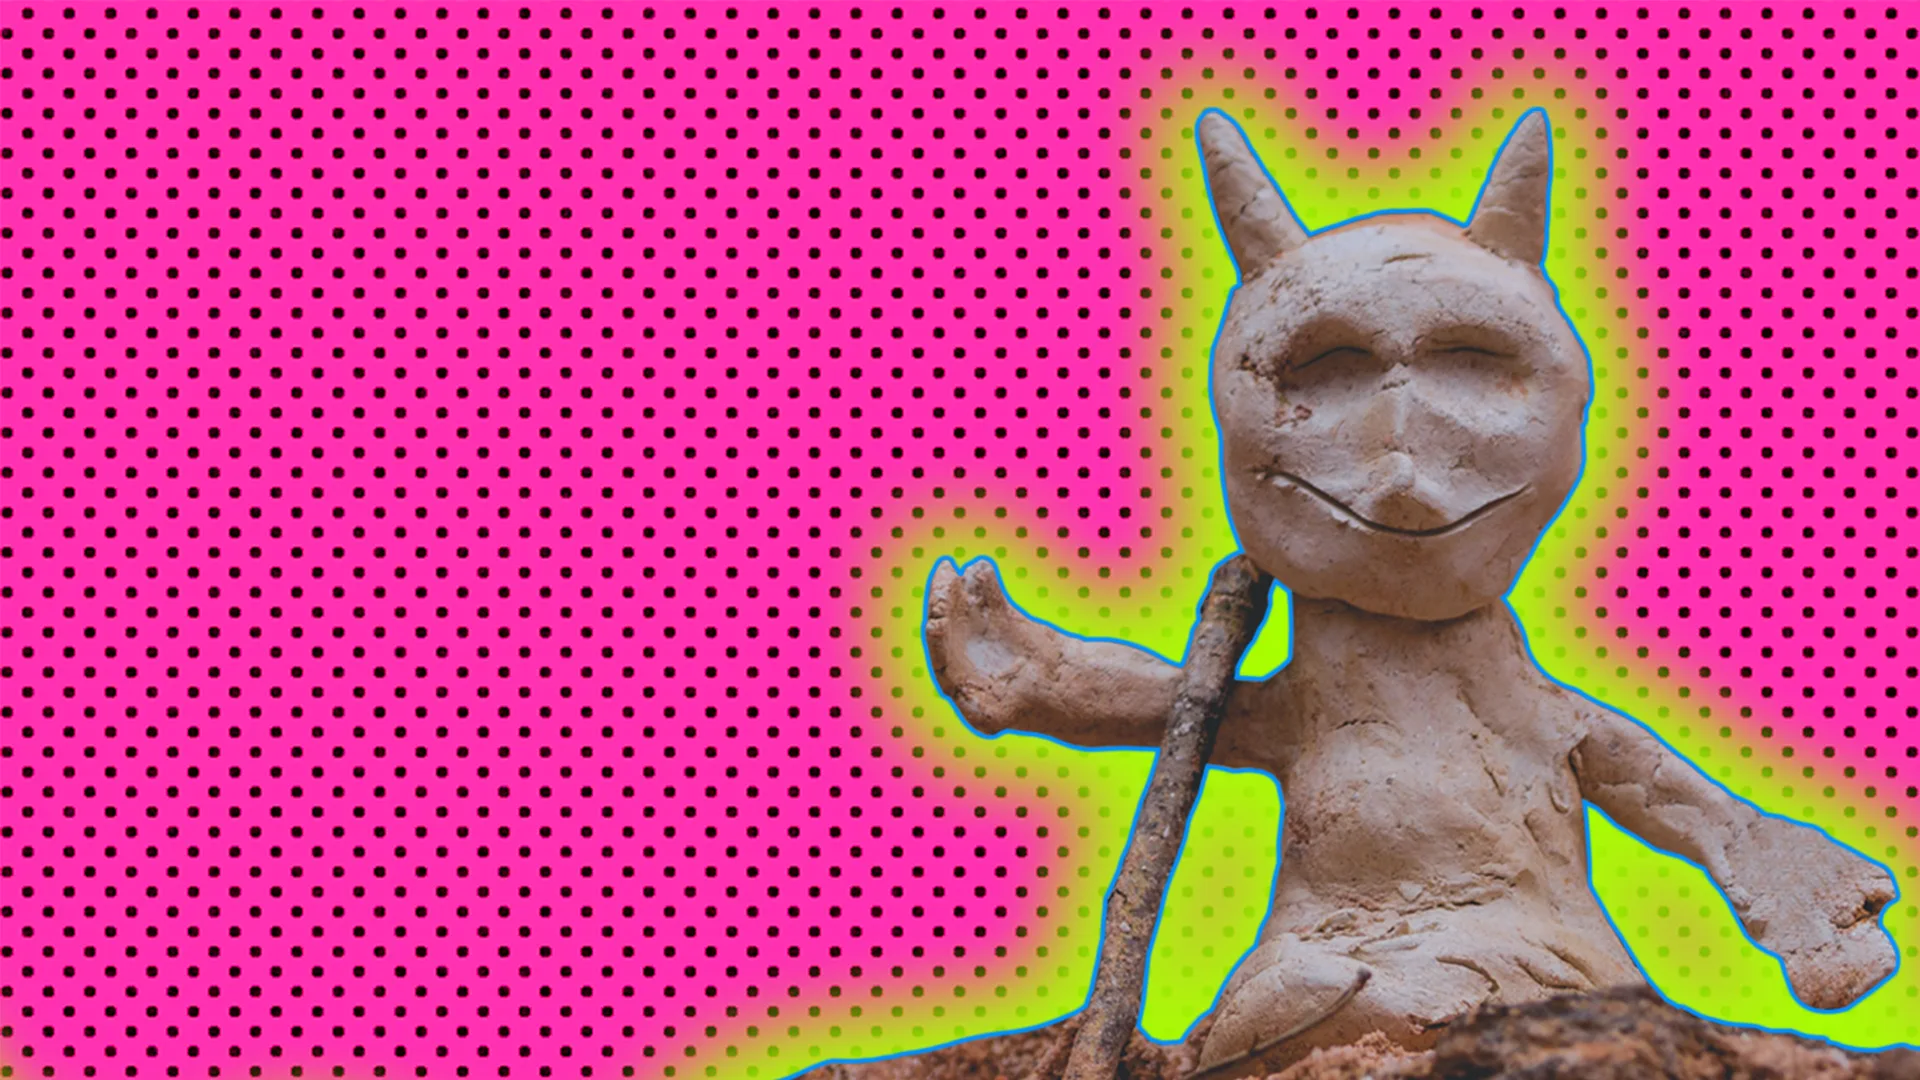 Clay monster - in graphic house style